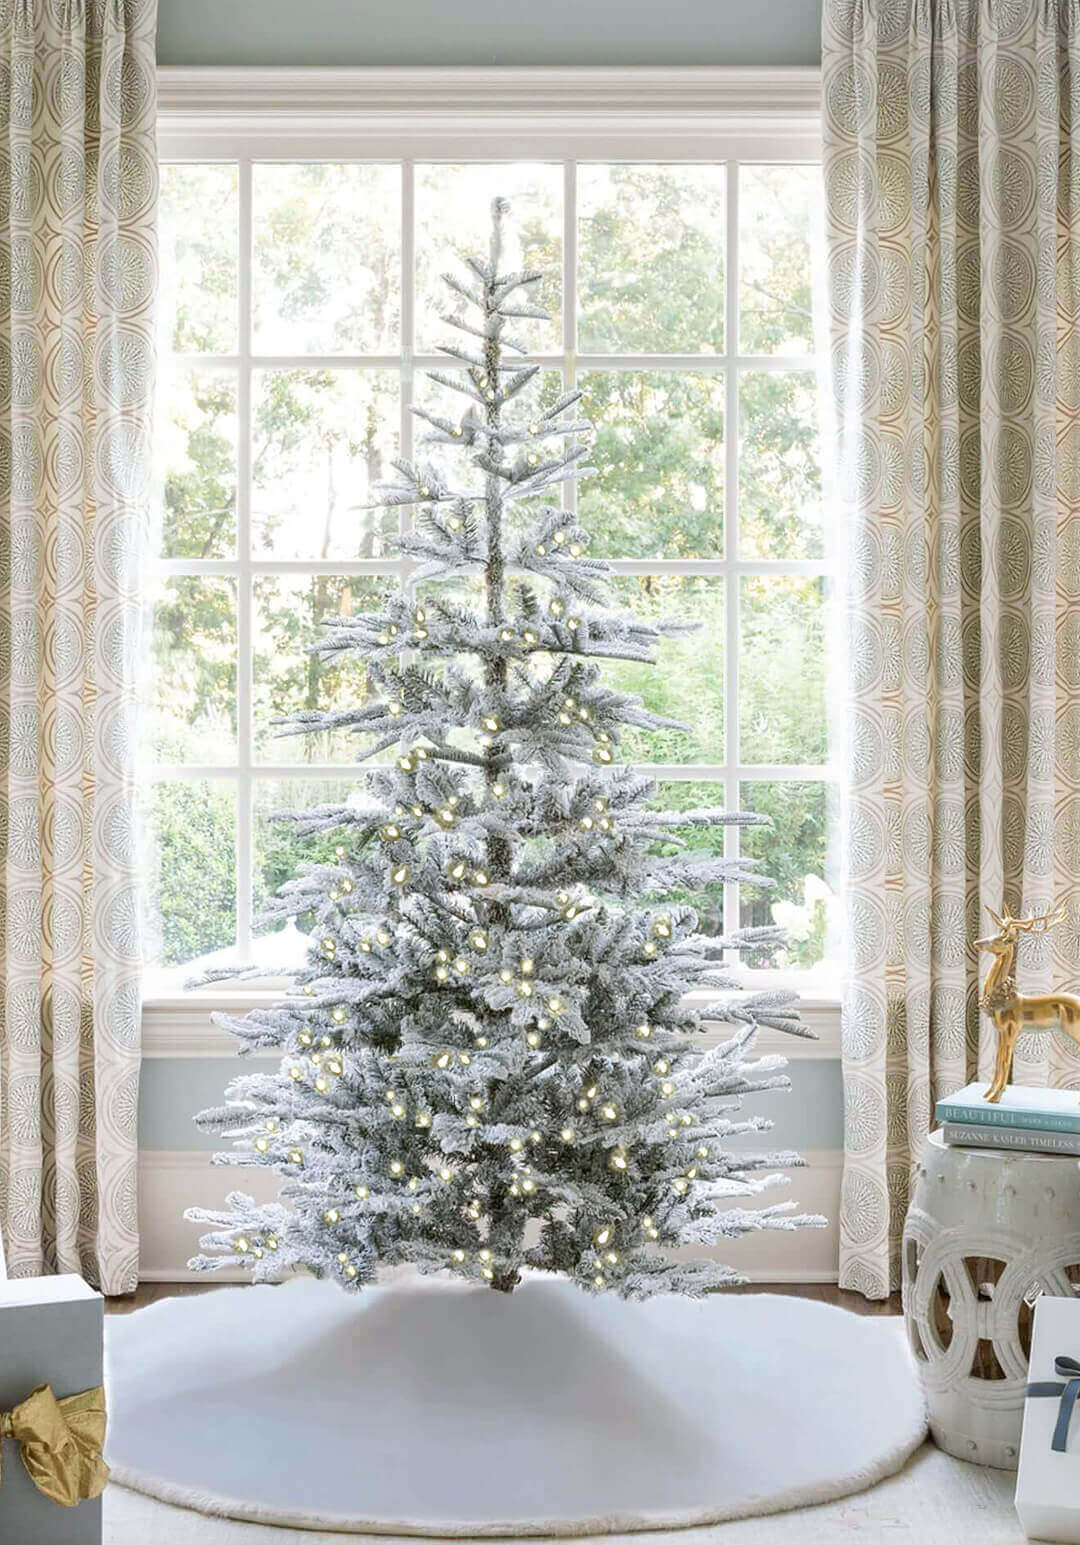 King of Christmas 7' King Noble Flock Artificial Christmas Tree with 500 Warm White LED Lights